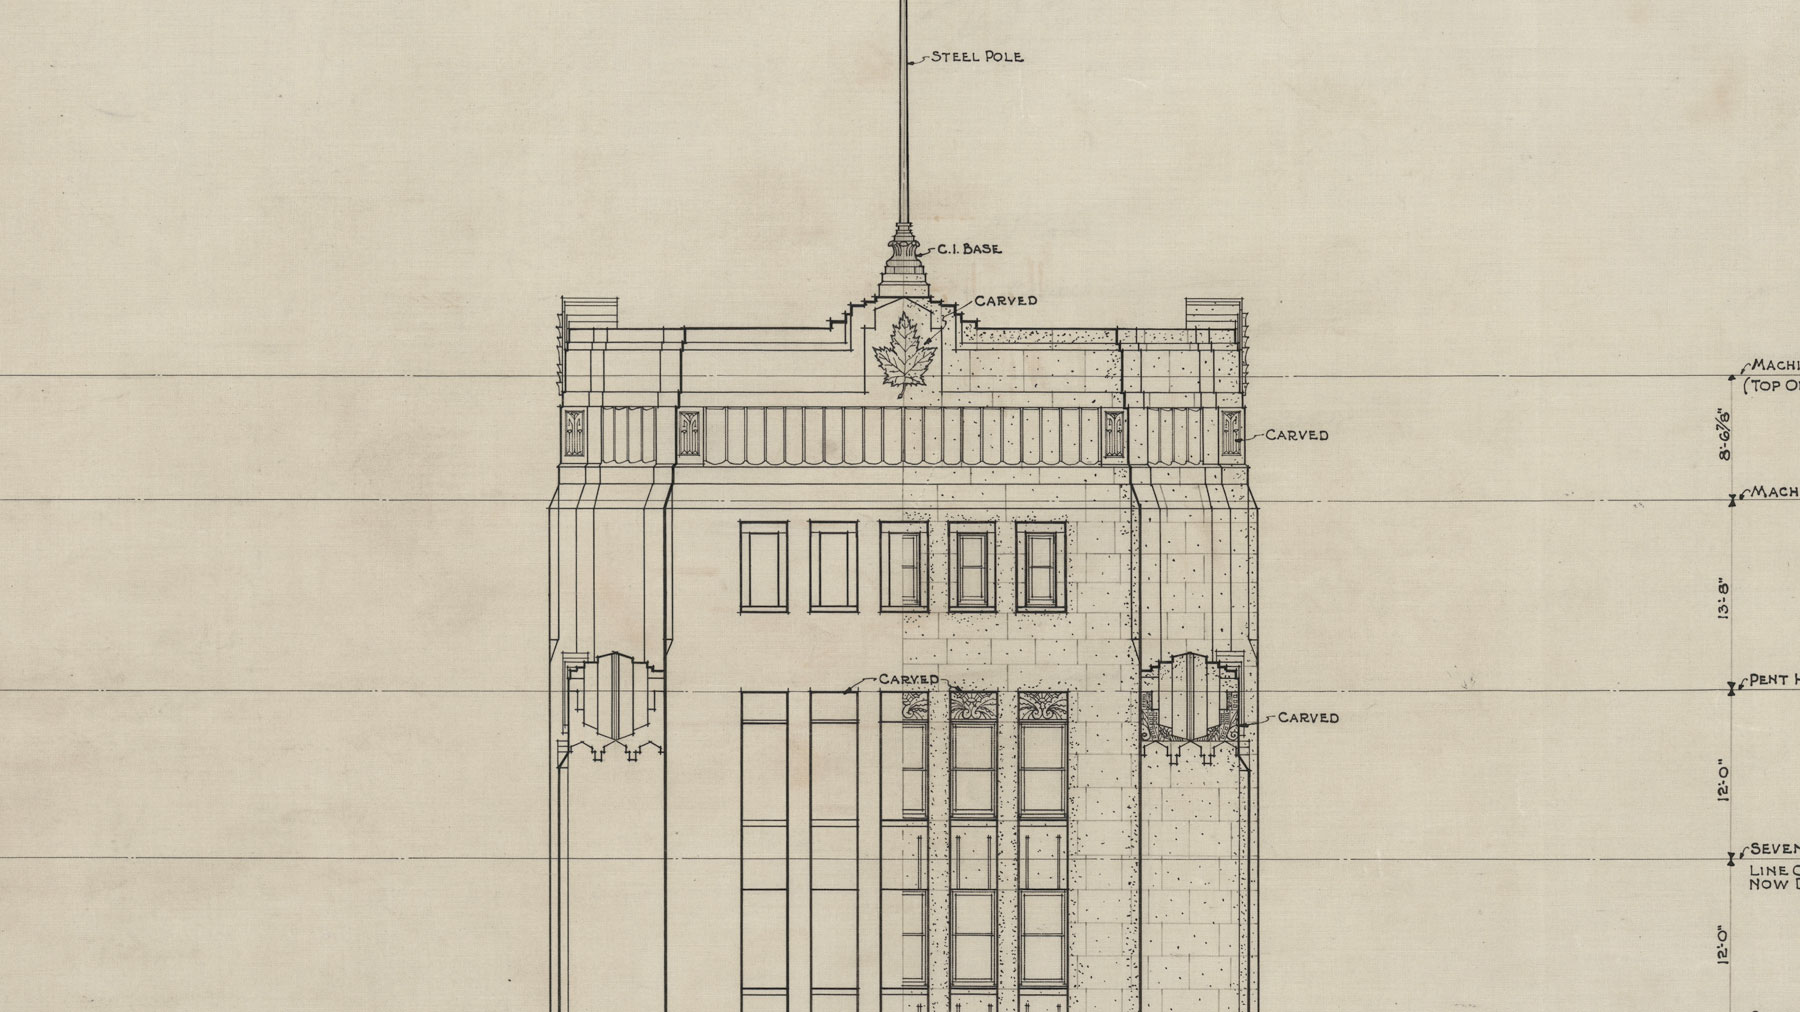 The Dominion Public Building: The Architectural Drawings - Elevation